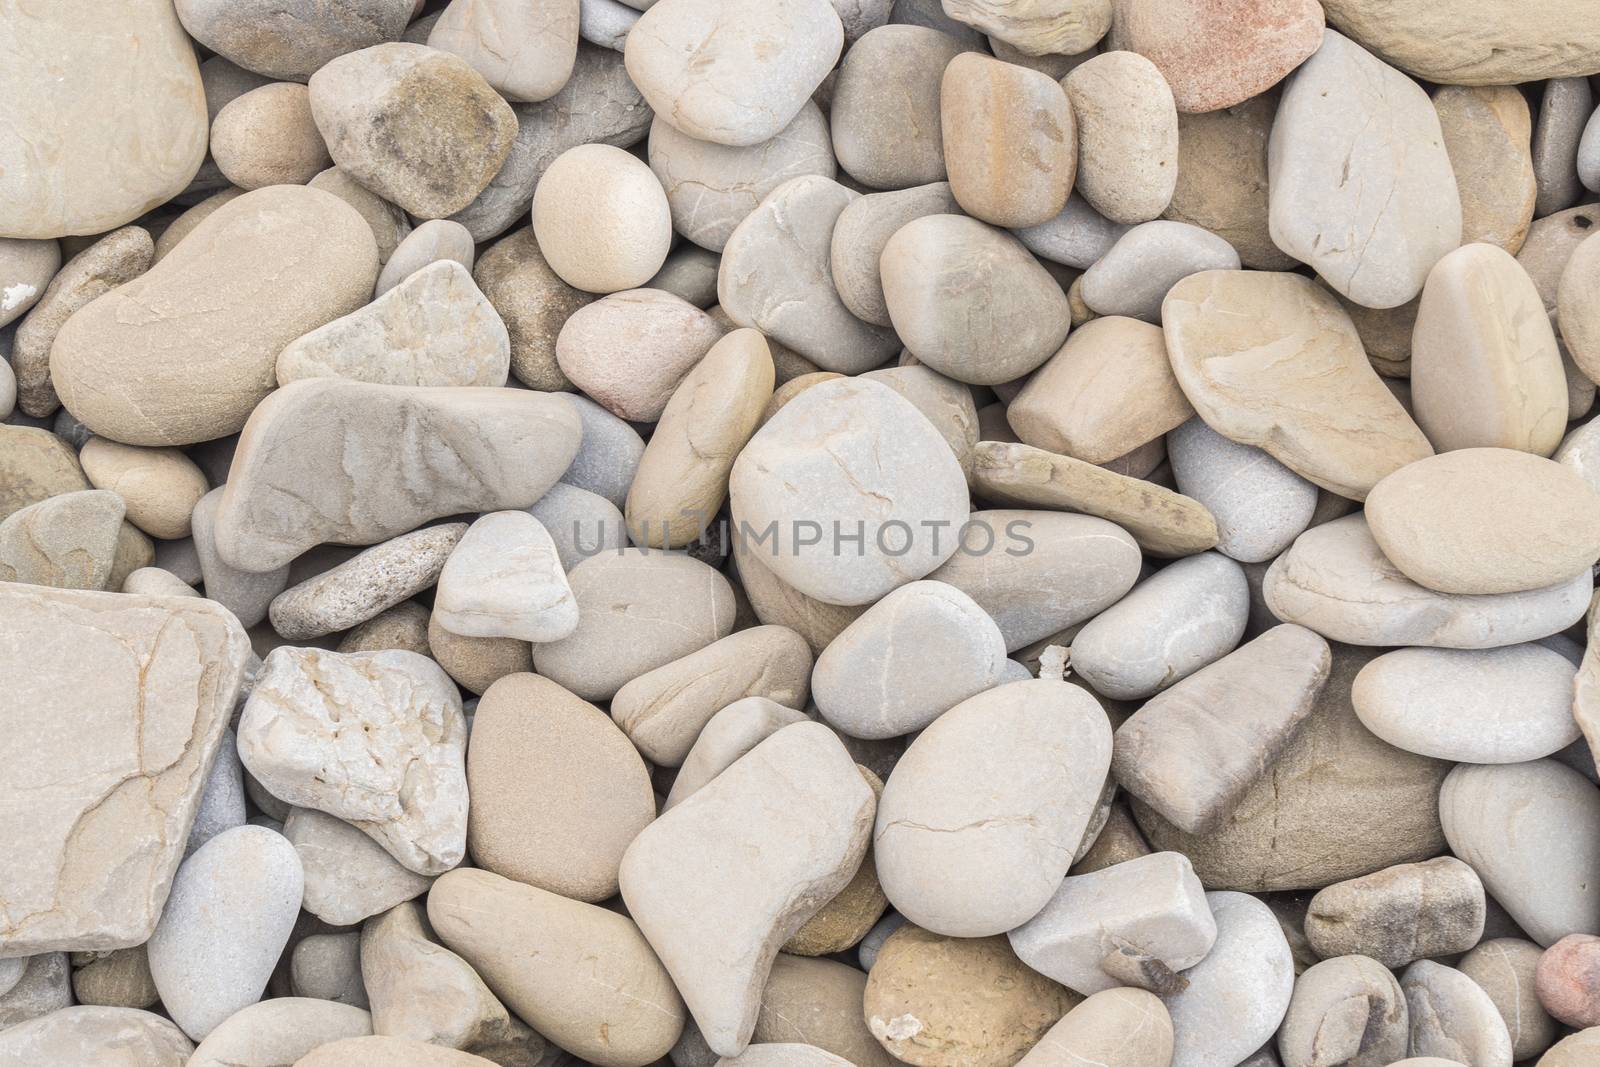 Large amount rounded and polished beach rocks by max8xam